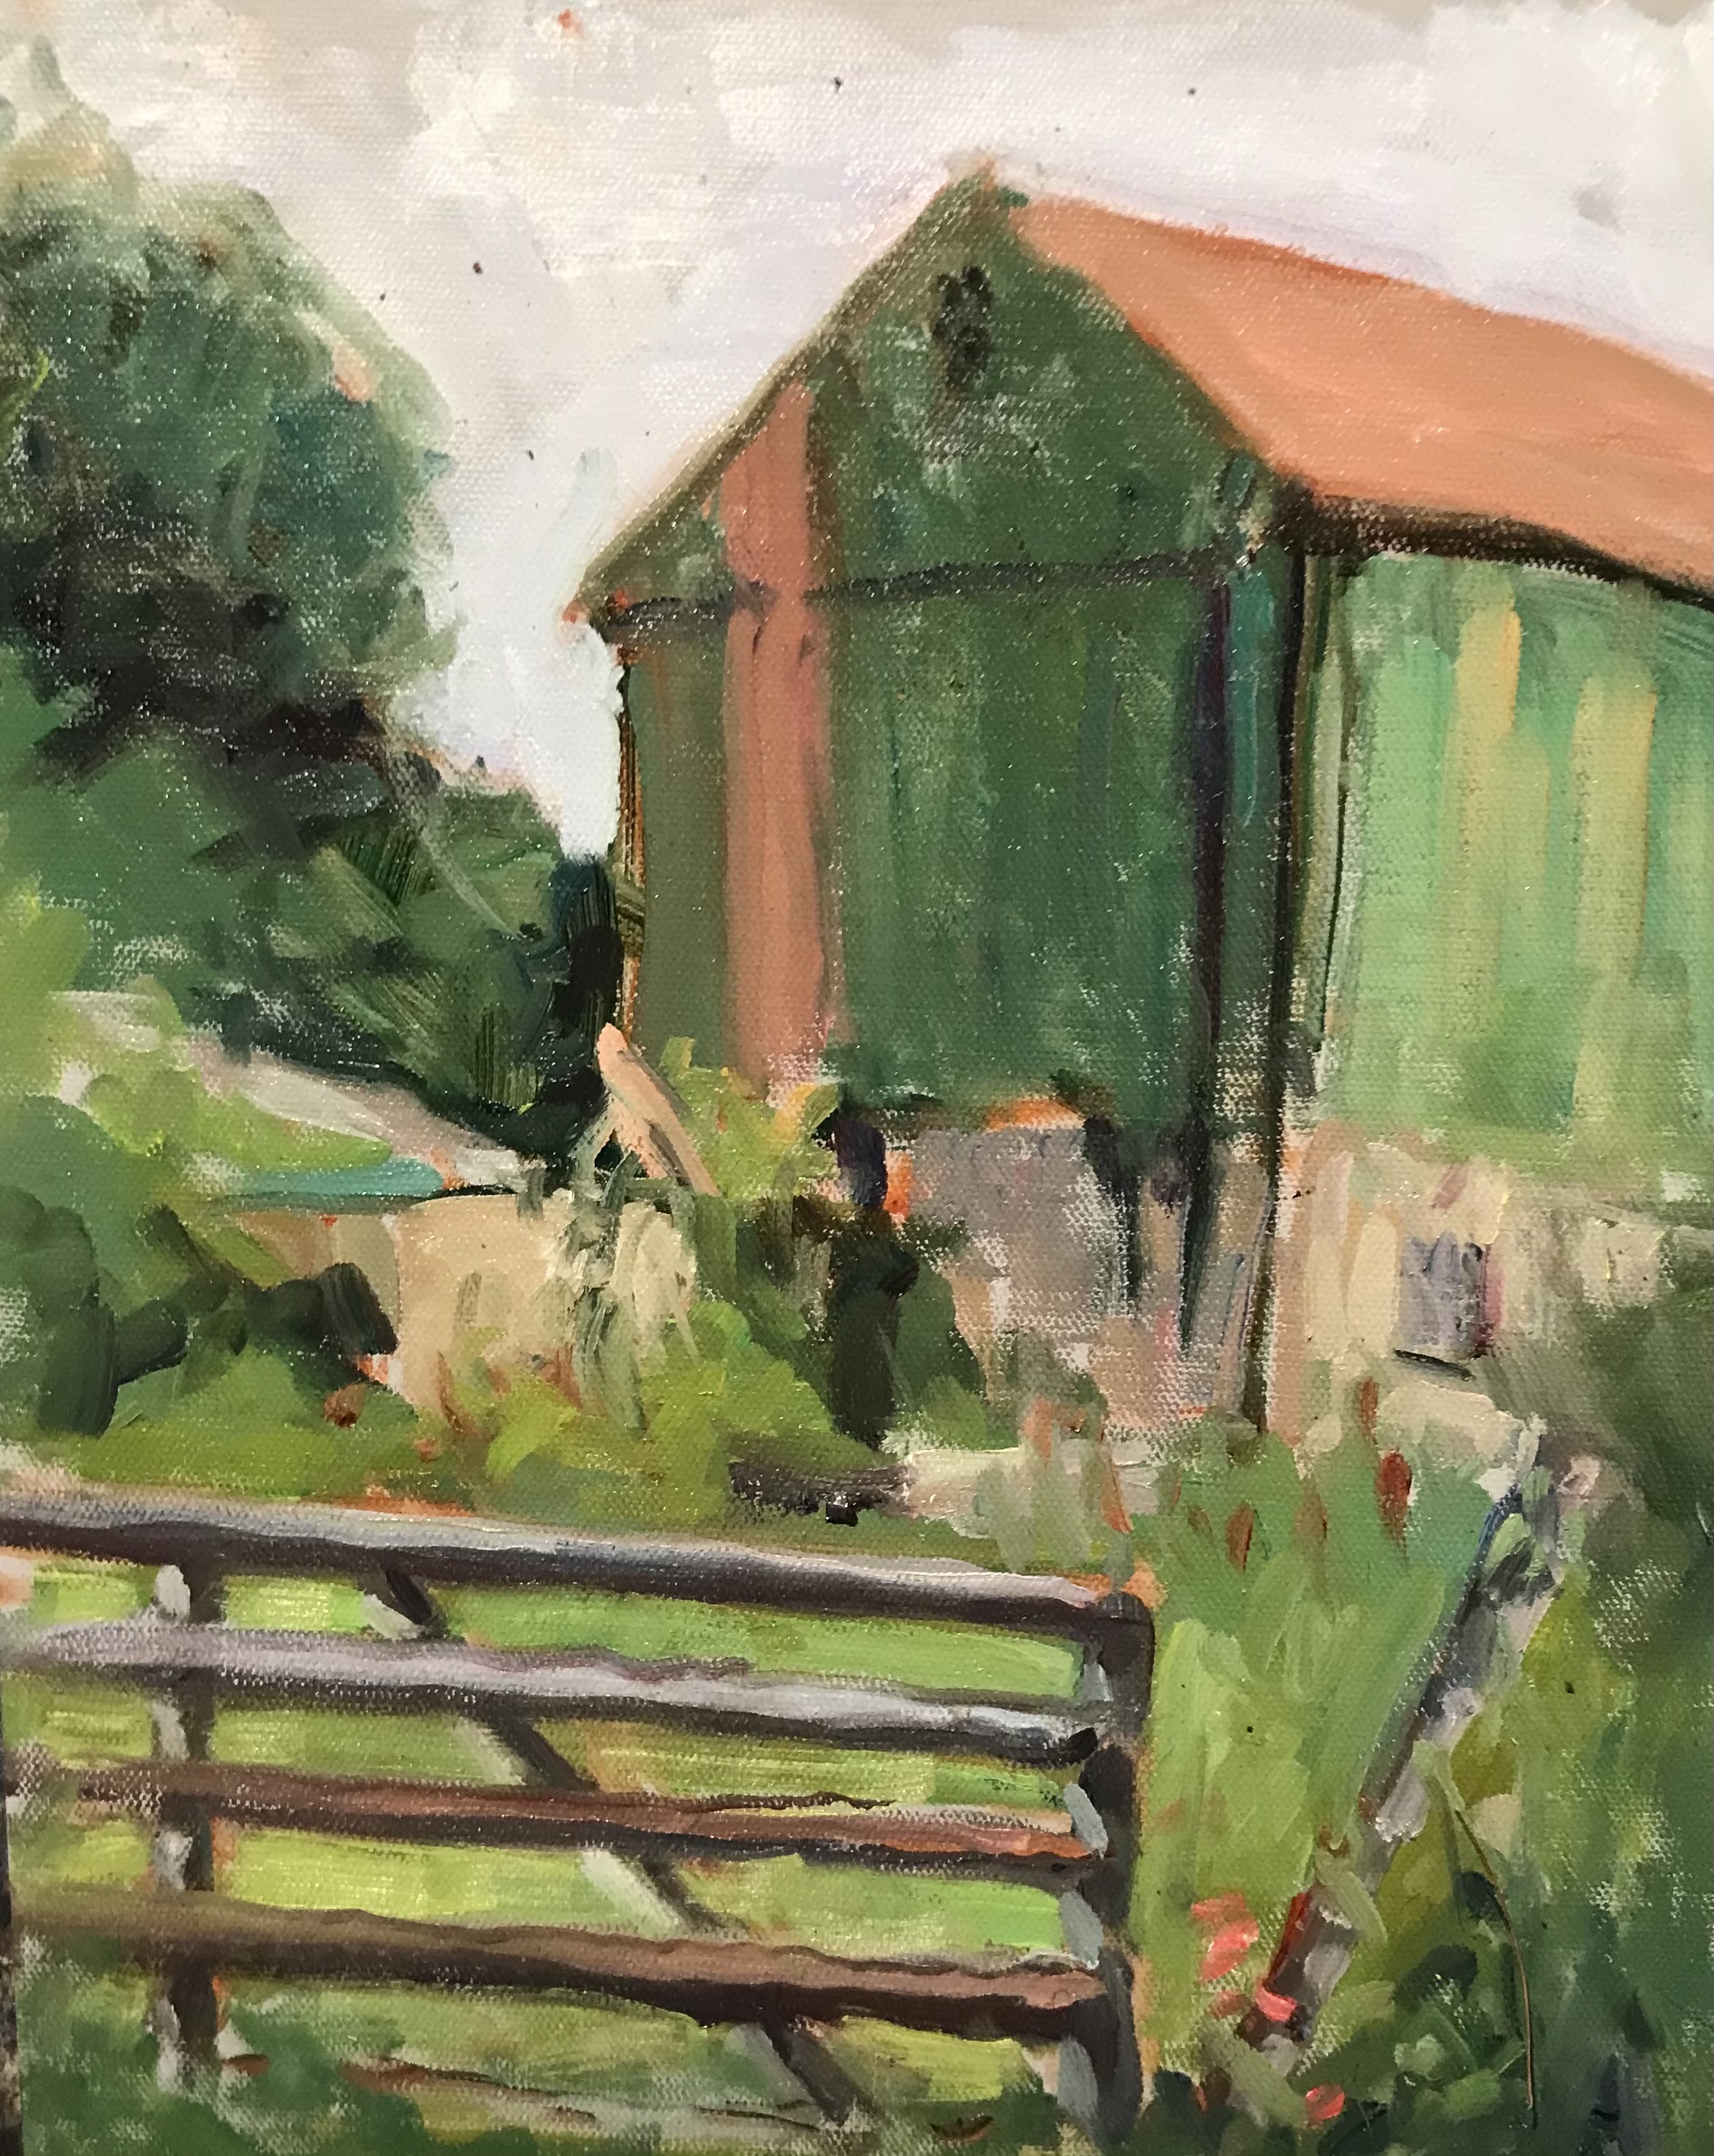 Painting of a Green Barn